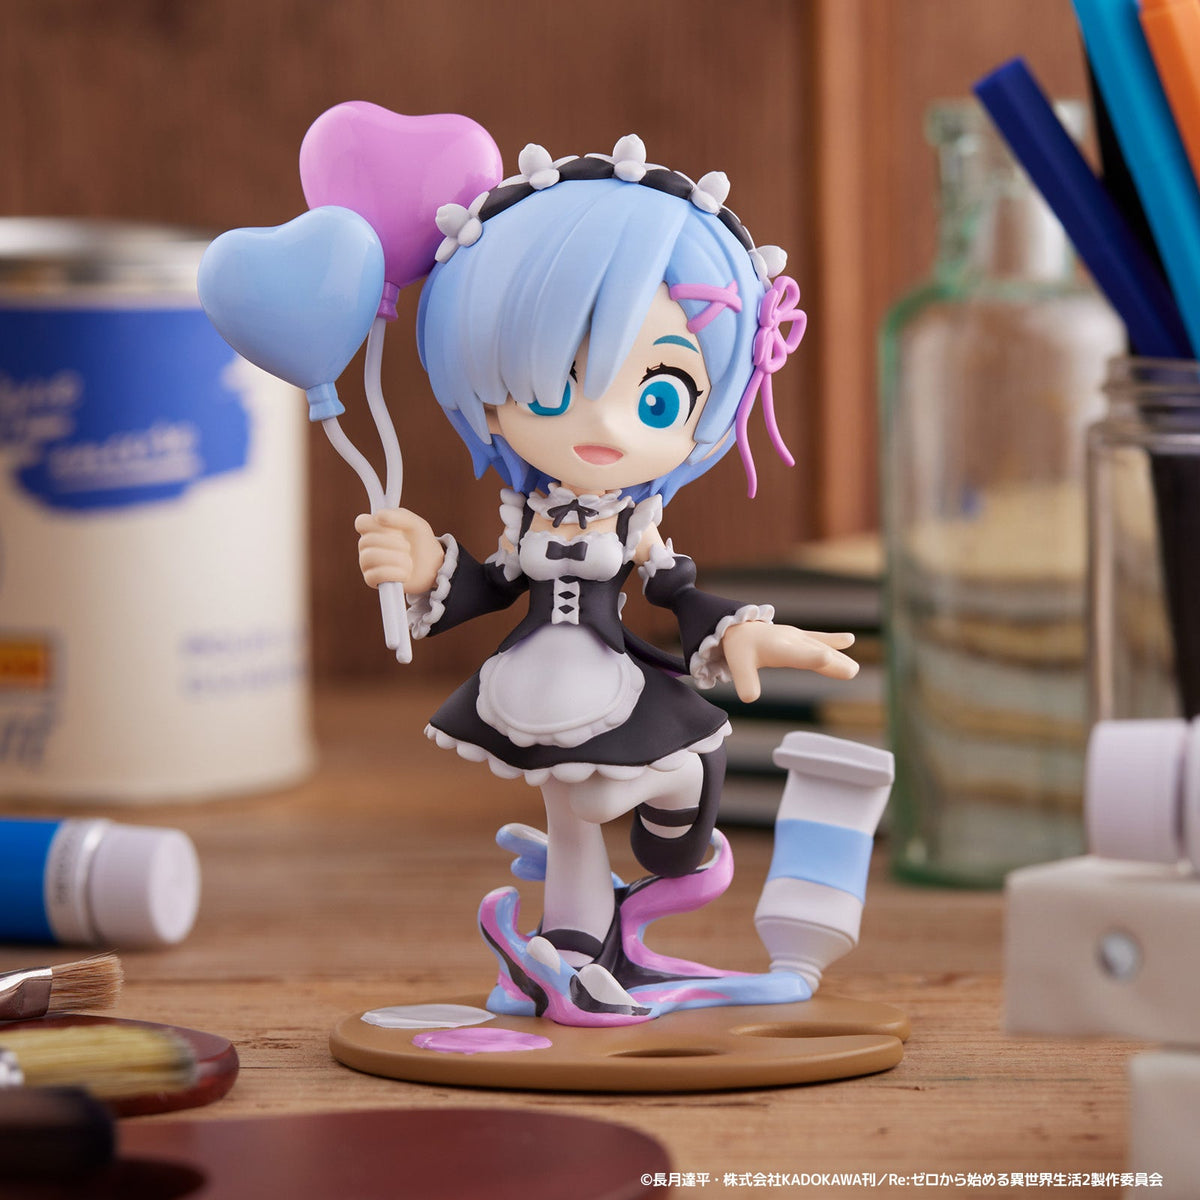 Re:Zero -Starting Life in Another World- PalVerse Palé. &quot;Rem&quot;-Bushiroad Creative-Ace Cards &amp; Collectibles